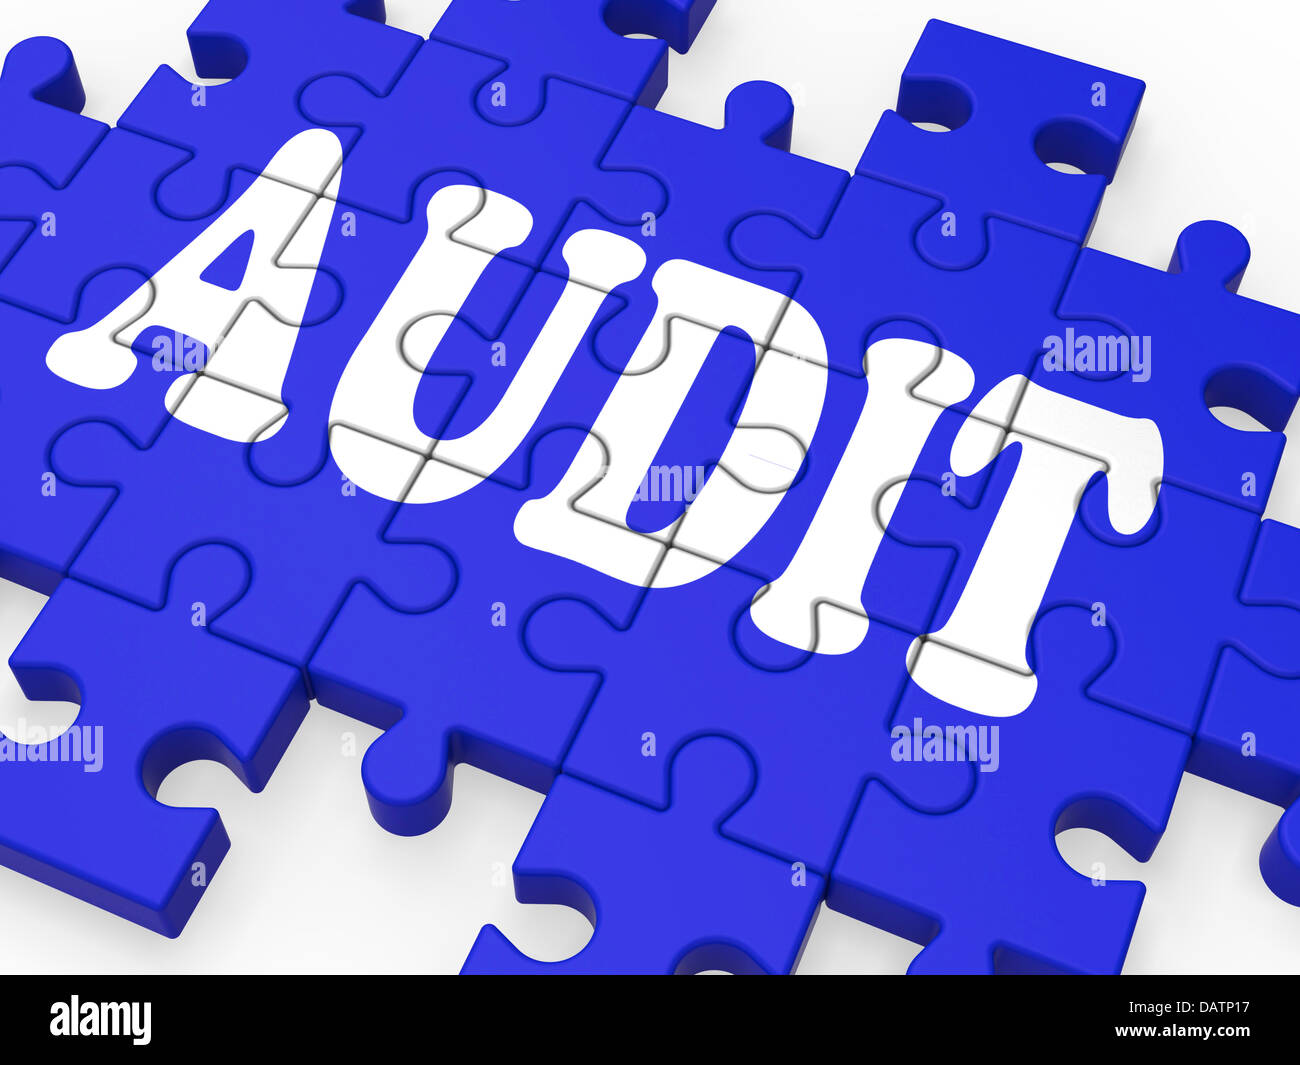 Audit Puzzle Showing Auditor Inspections Stock Photo